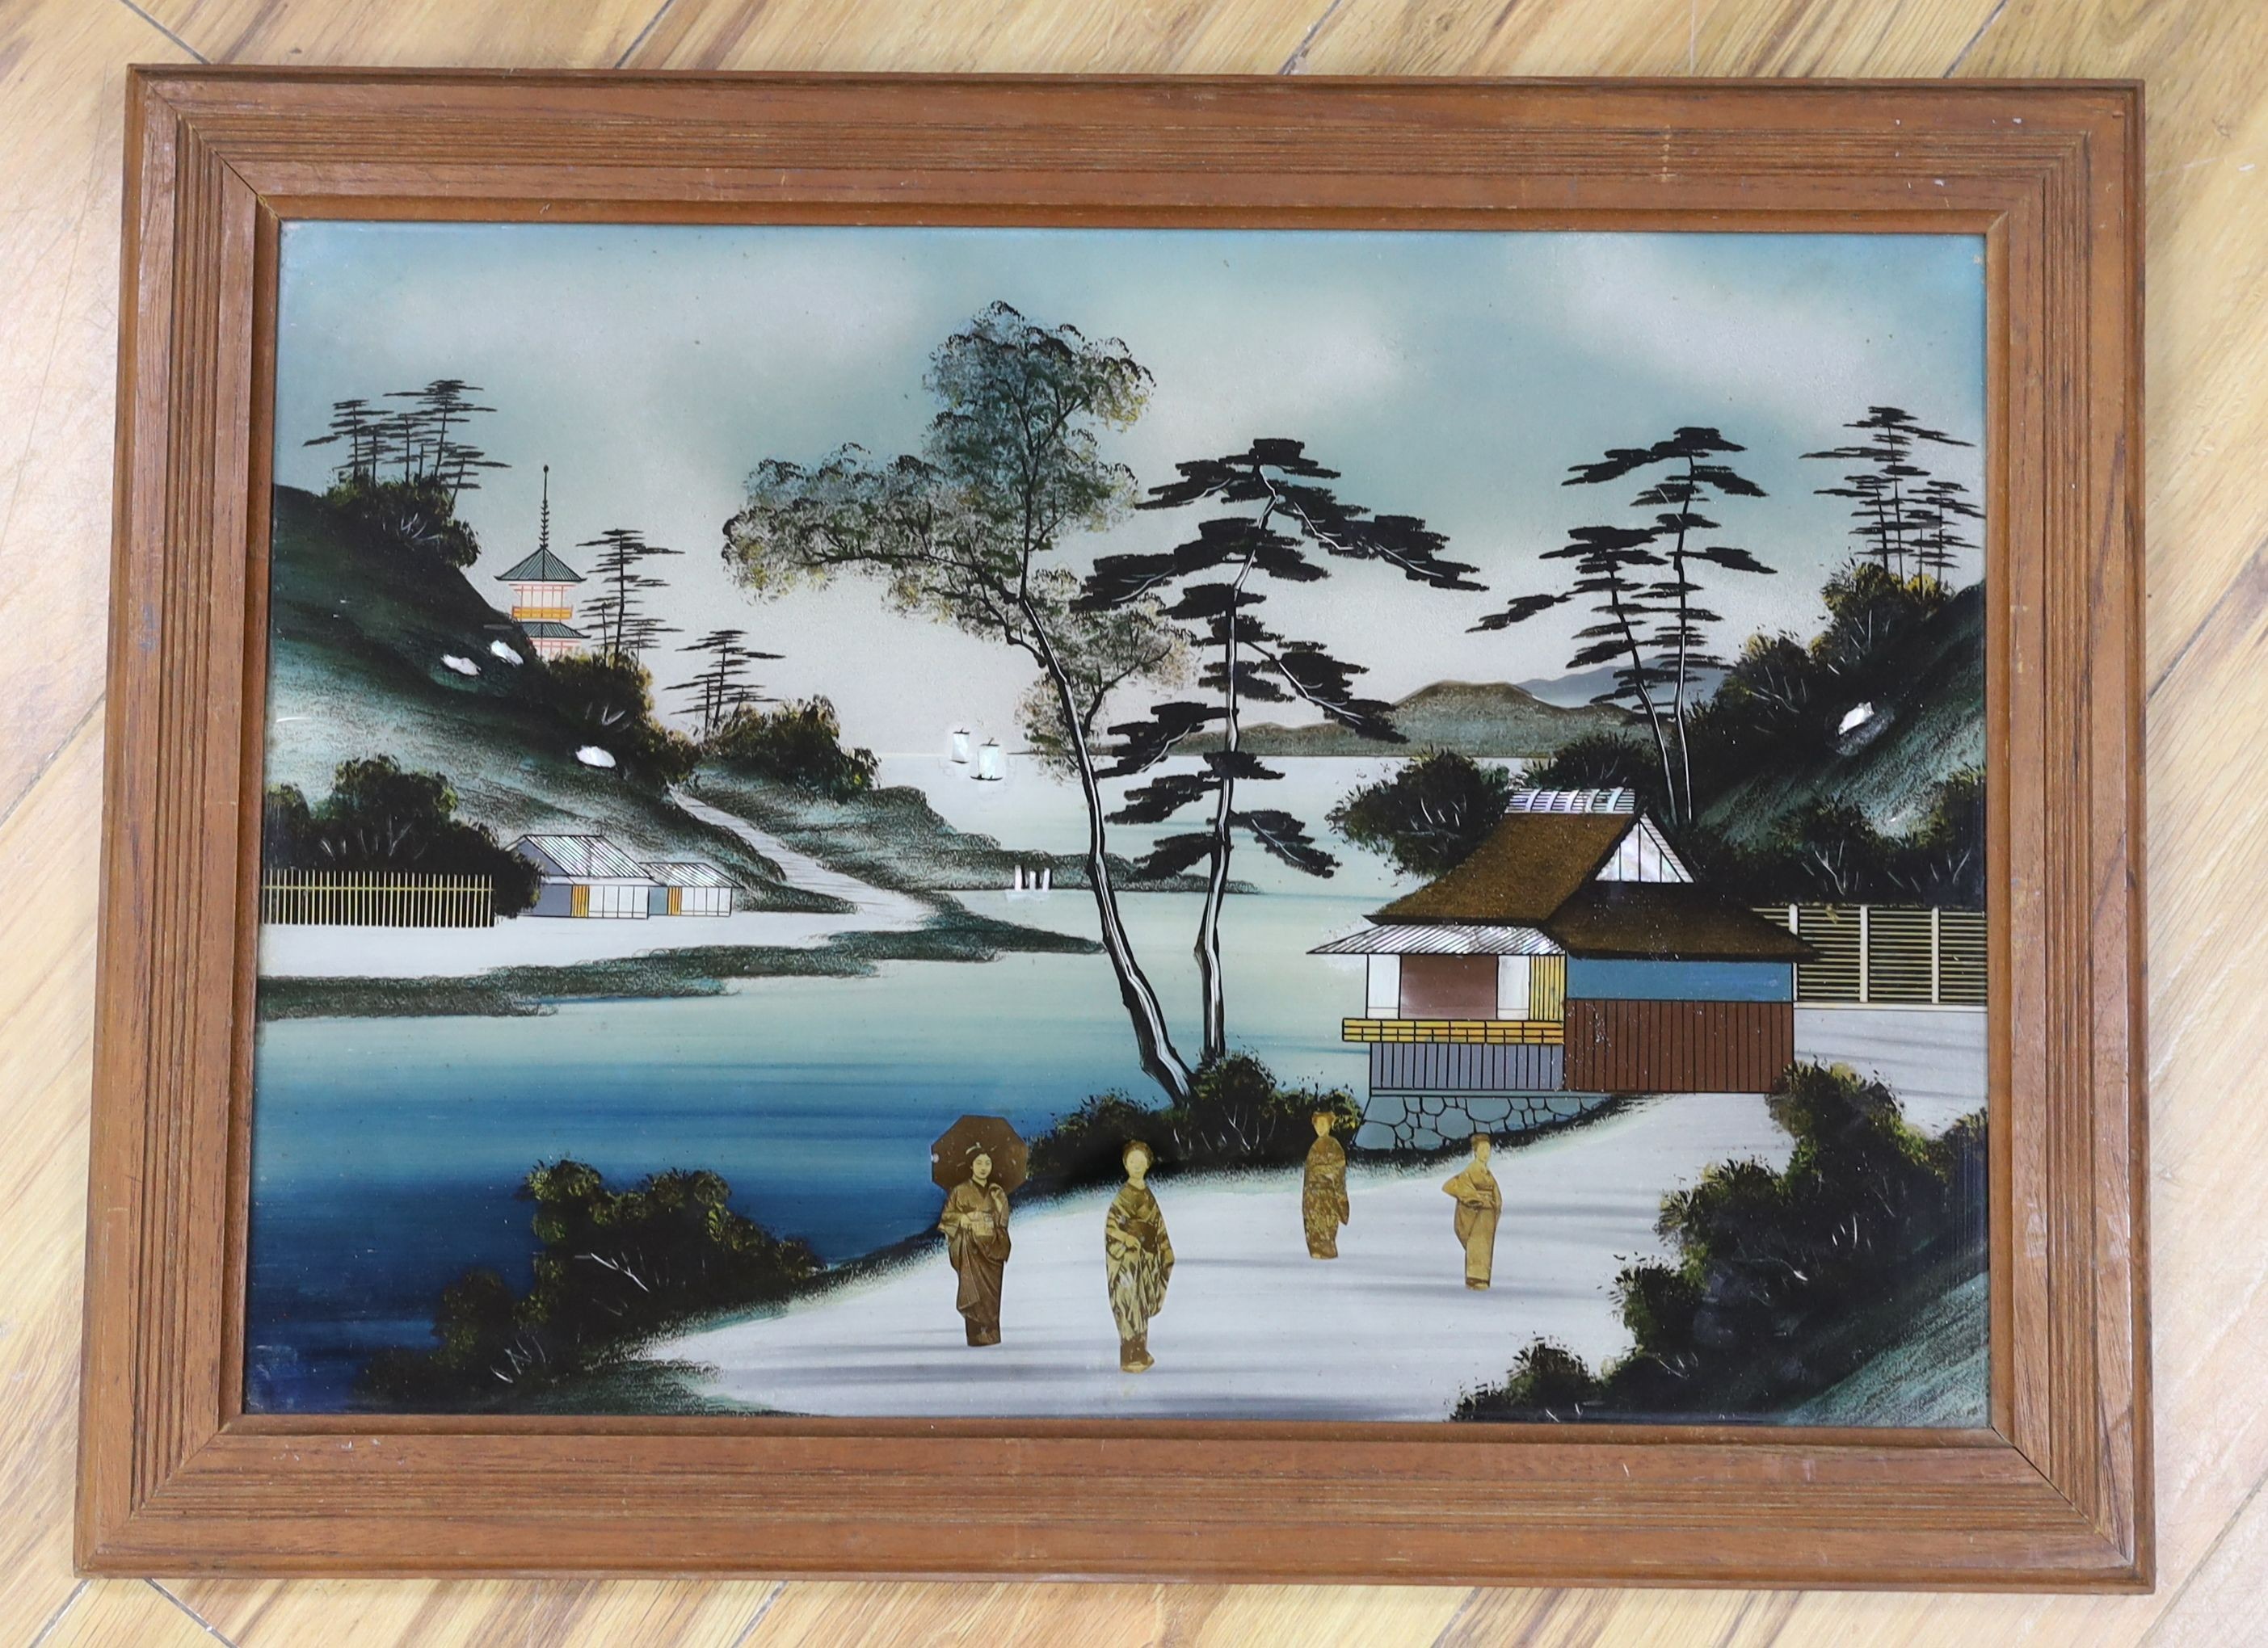 A Japanese reverse painting on glass, 49.5.wide x 34.5 high.